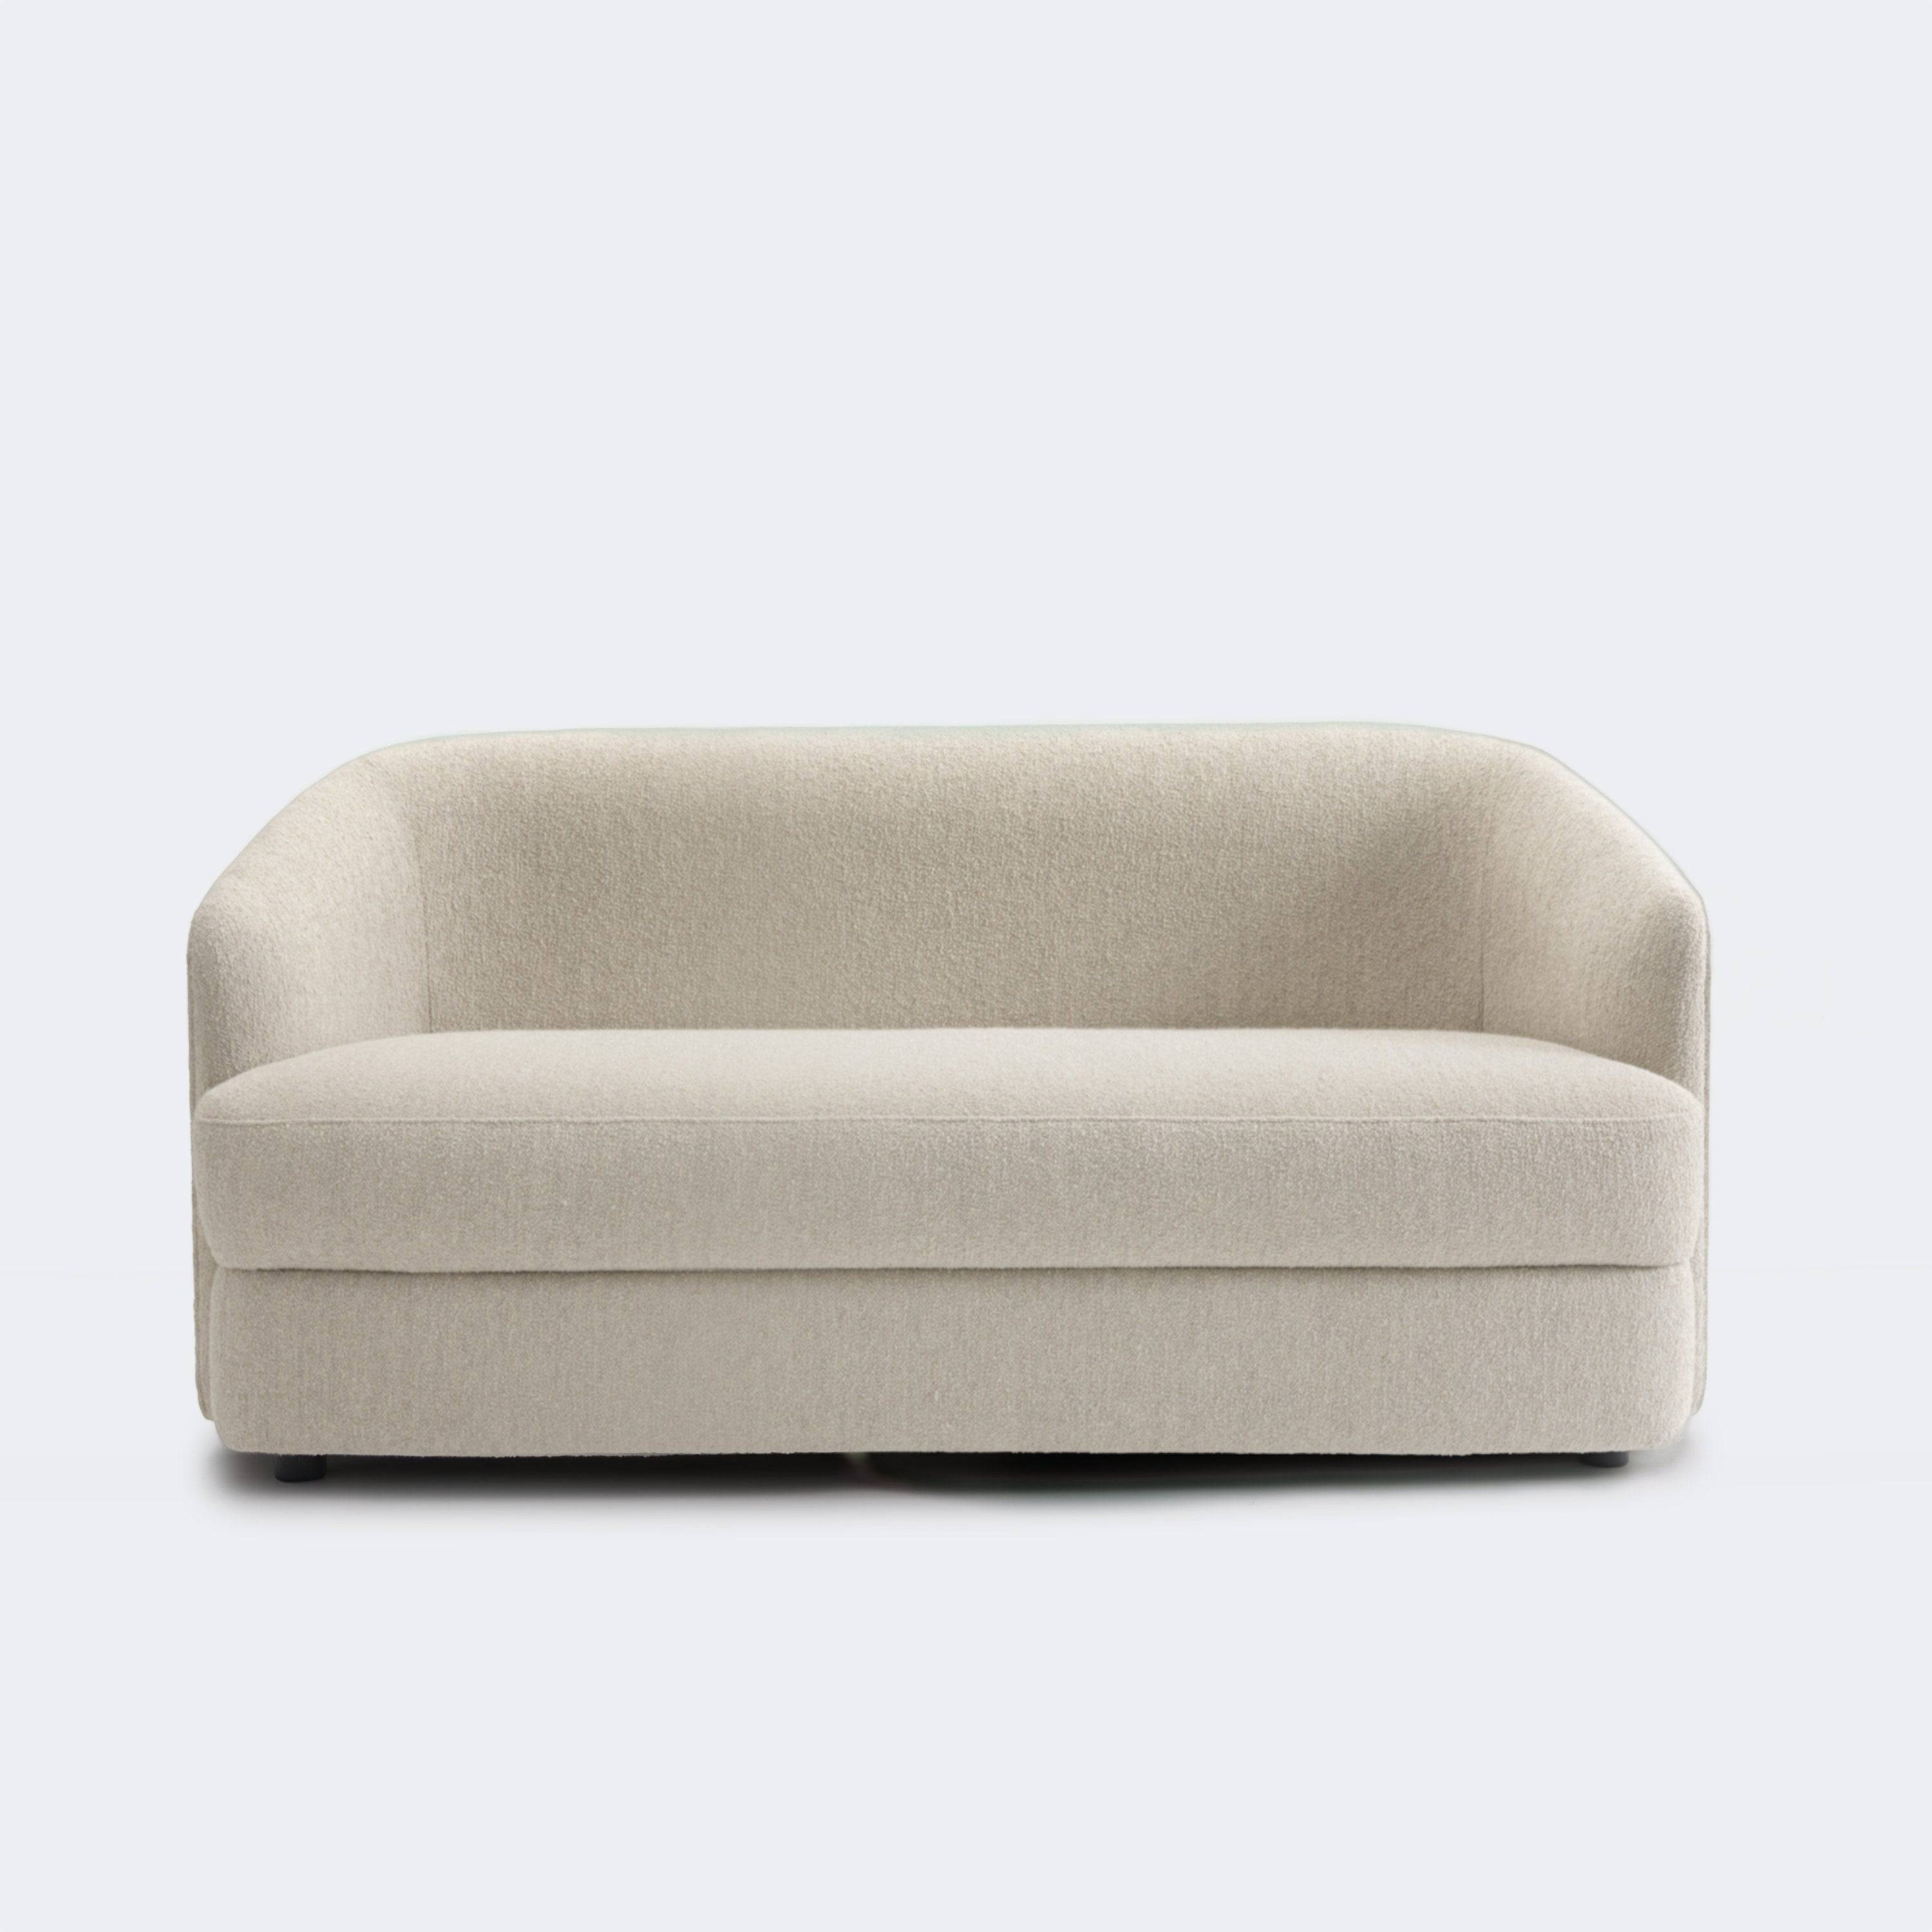 New Works Covent Sofa Deep, 2 Seater Off-White - KANSO#Upholstery_Lana